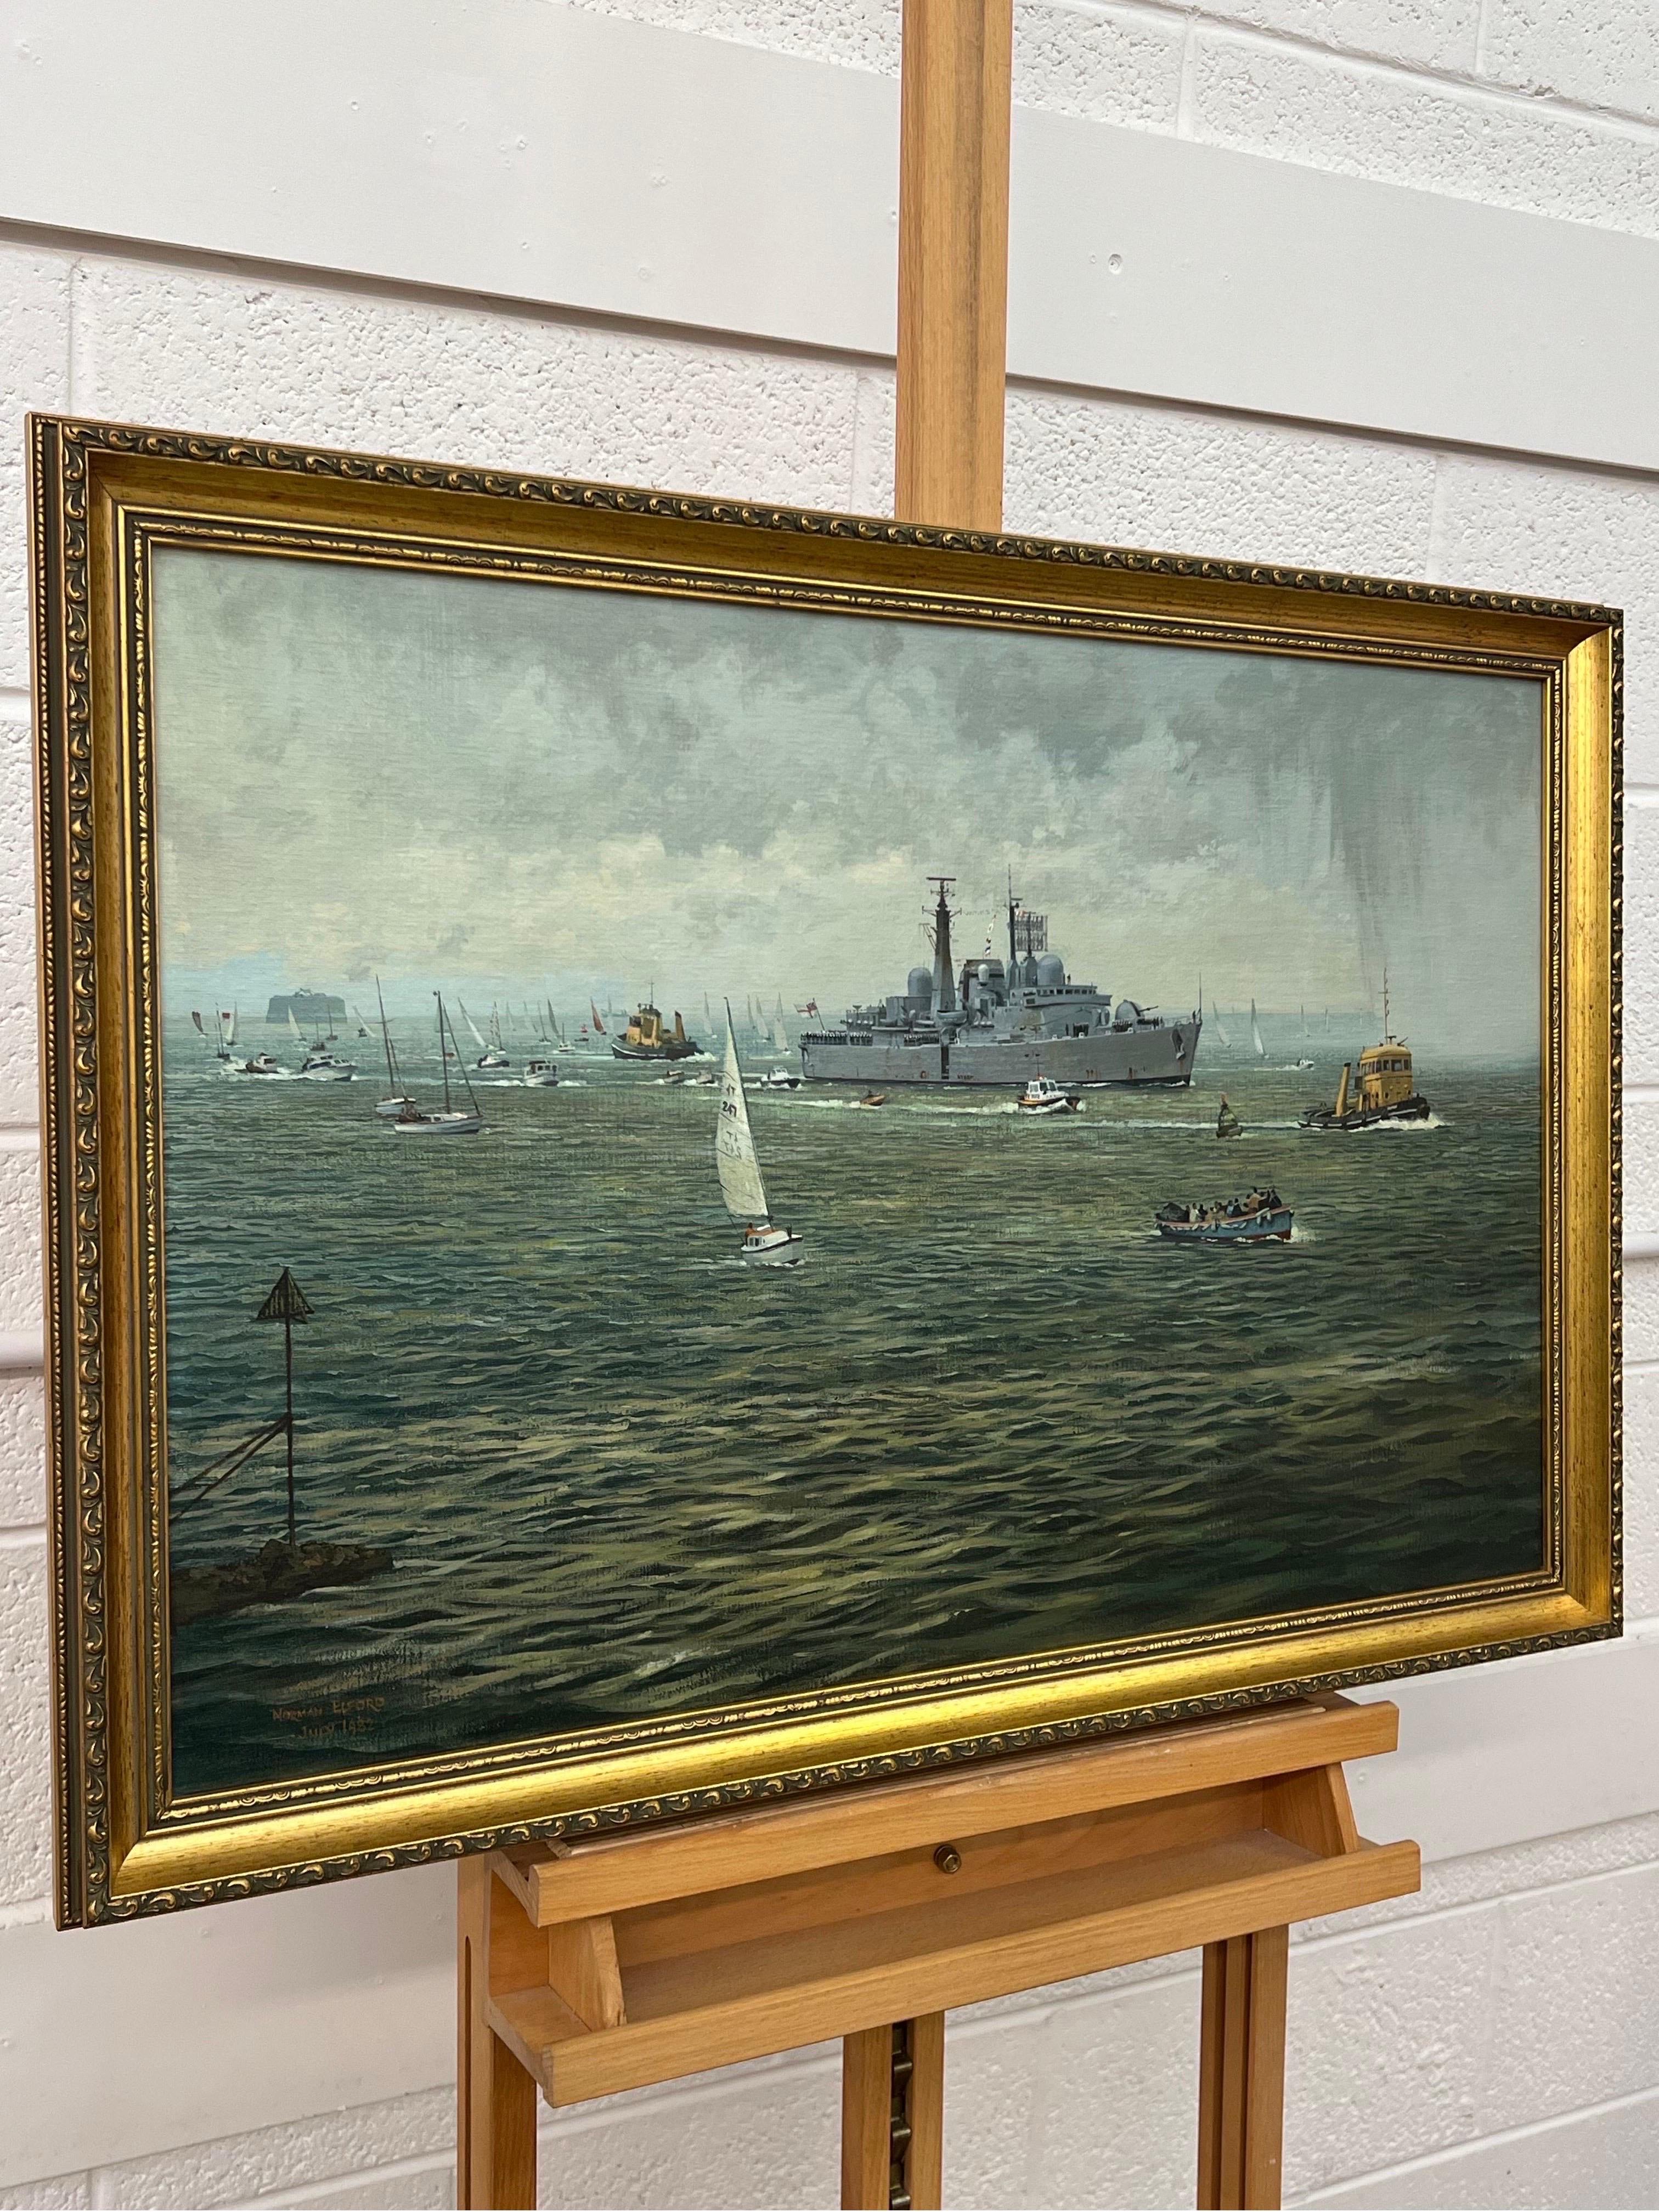 HMS Glasgow returning from Falklands - Shipping Scene Warship & other Vessels - Painting by Norman Elford